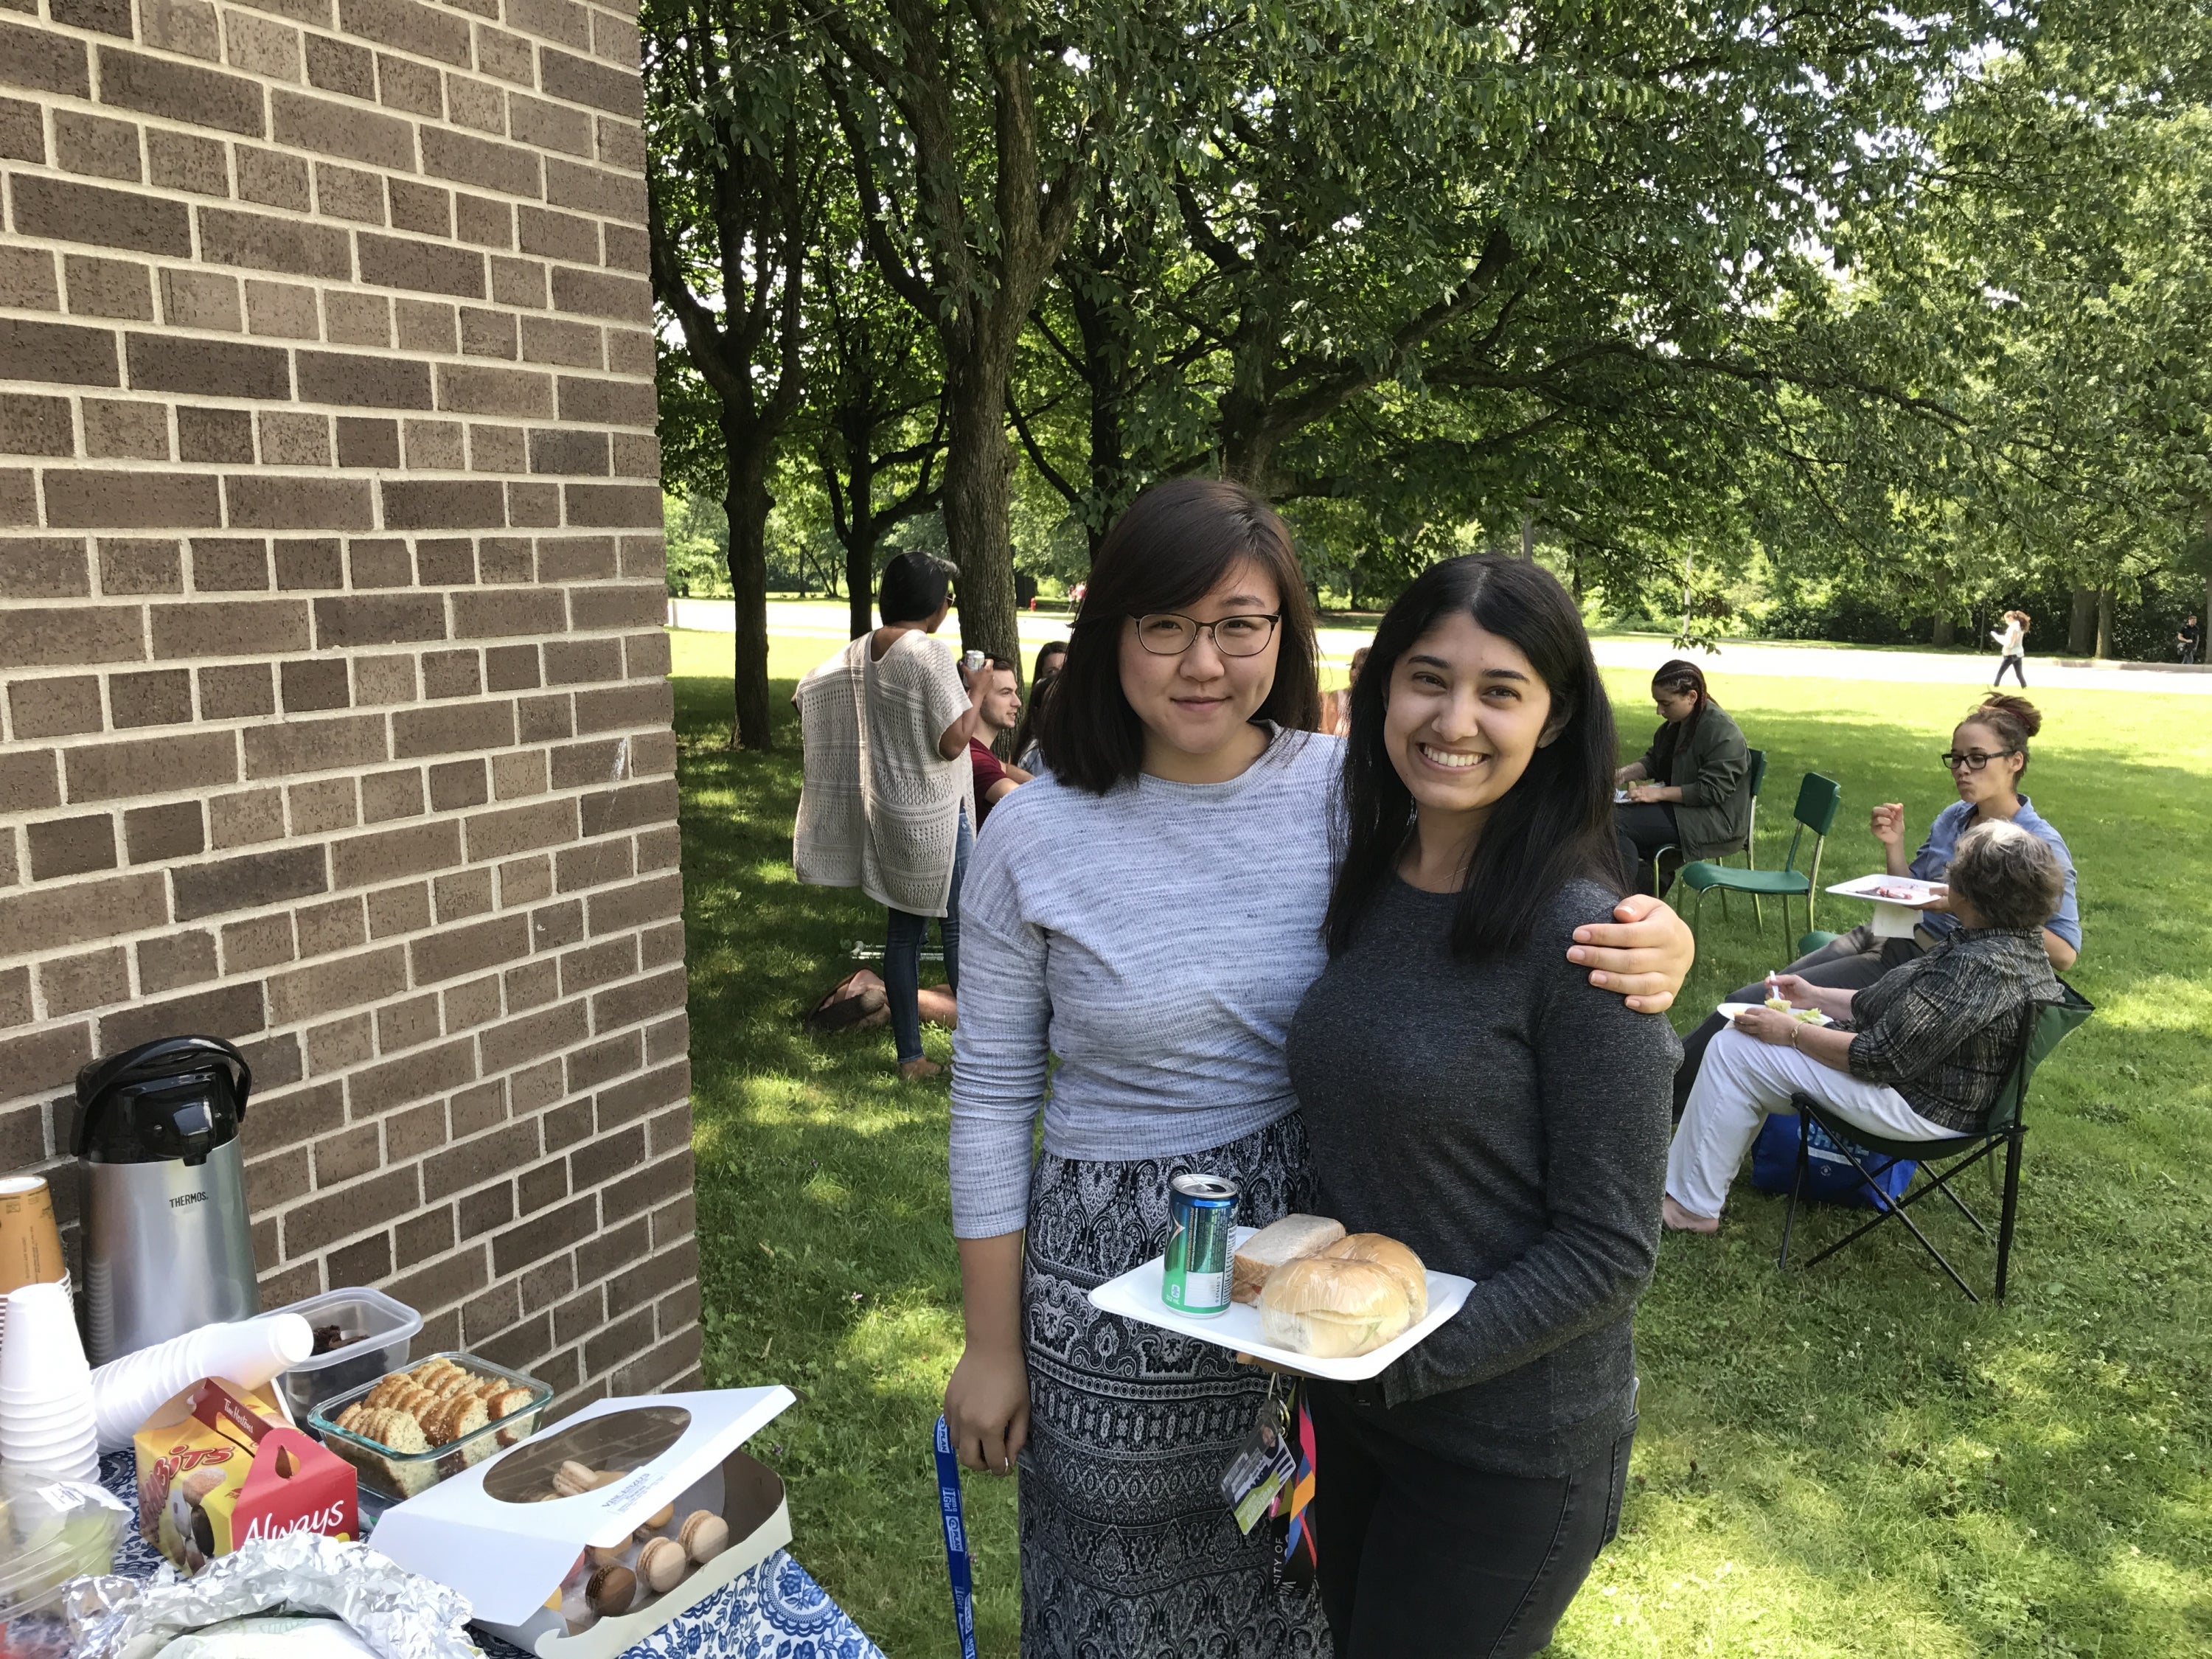 Students enjoying the French Studies department picnic